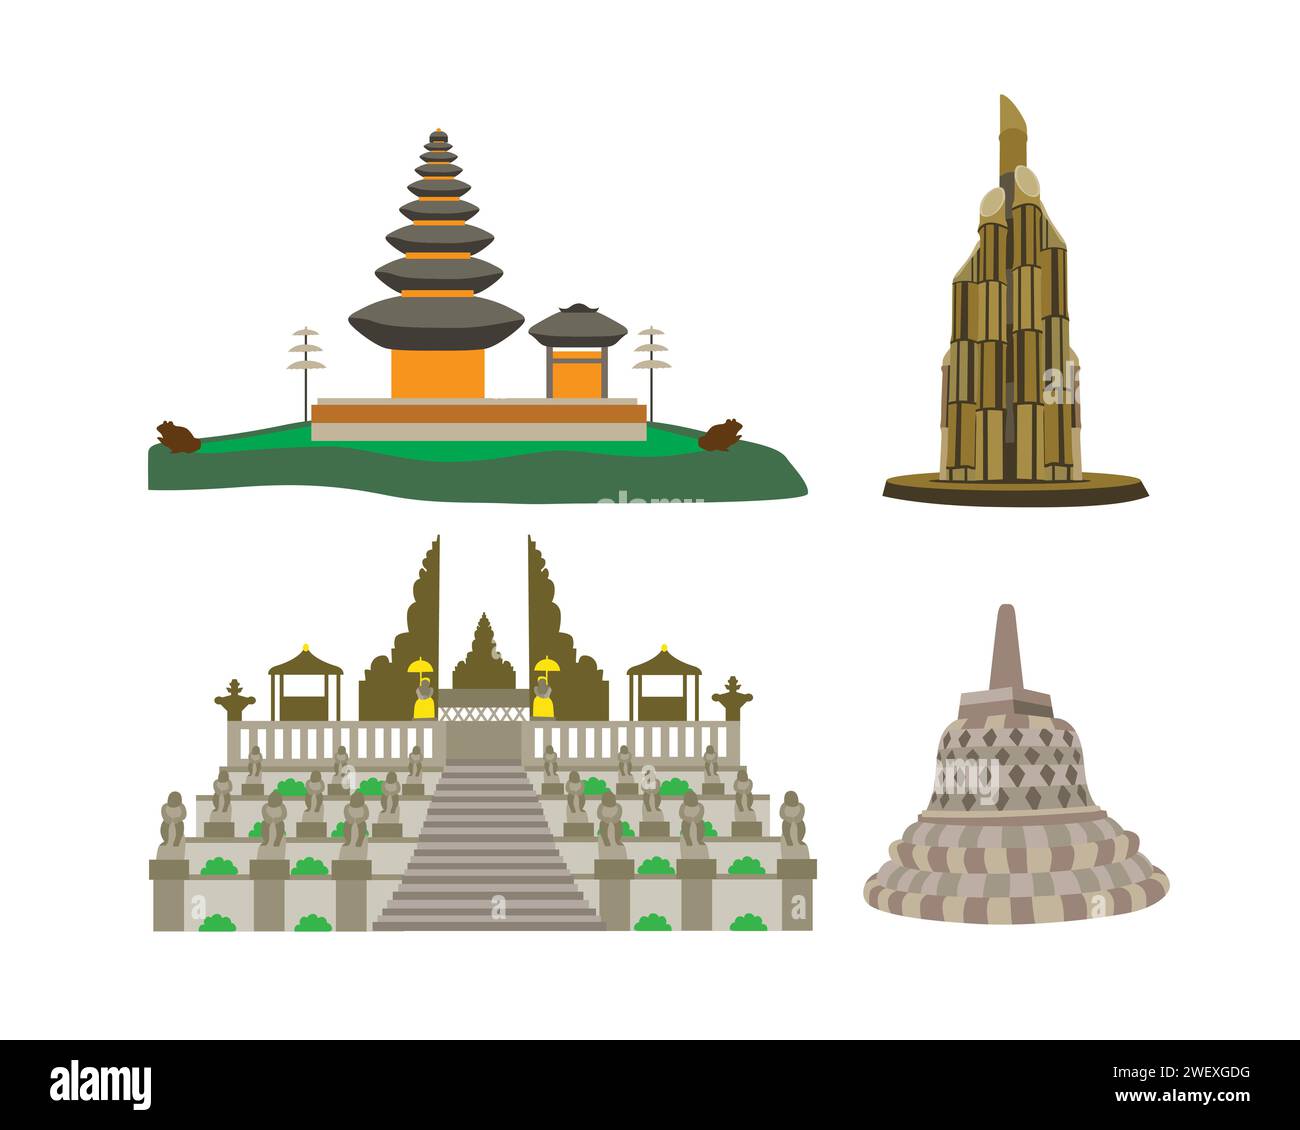 indonesian temple set. Vector illustration of indonesian temple. Stock Vector